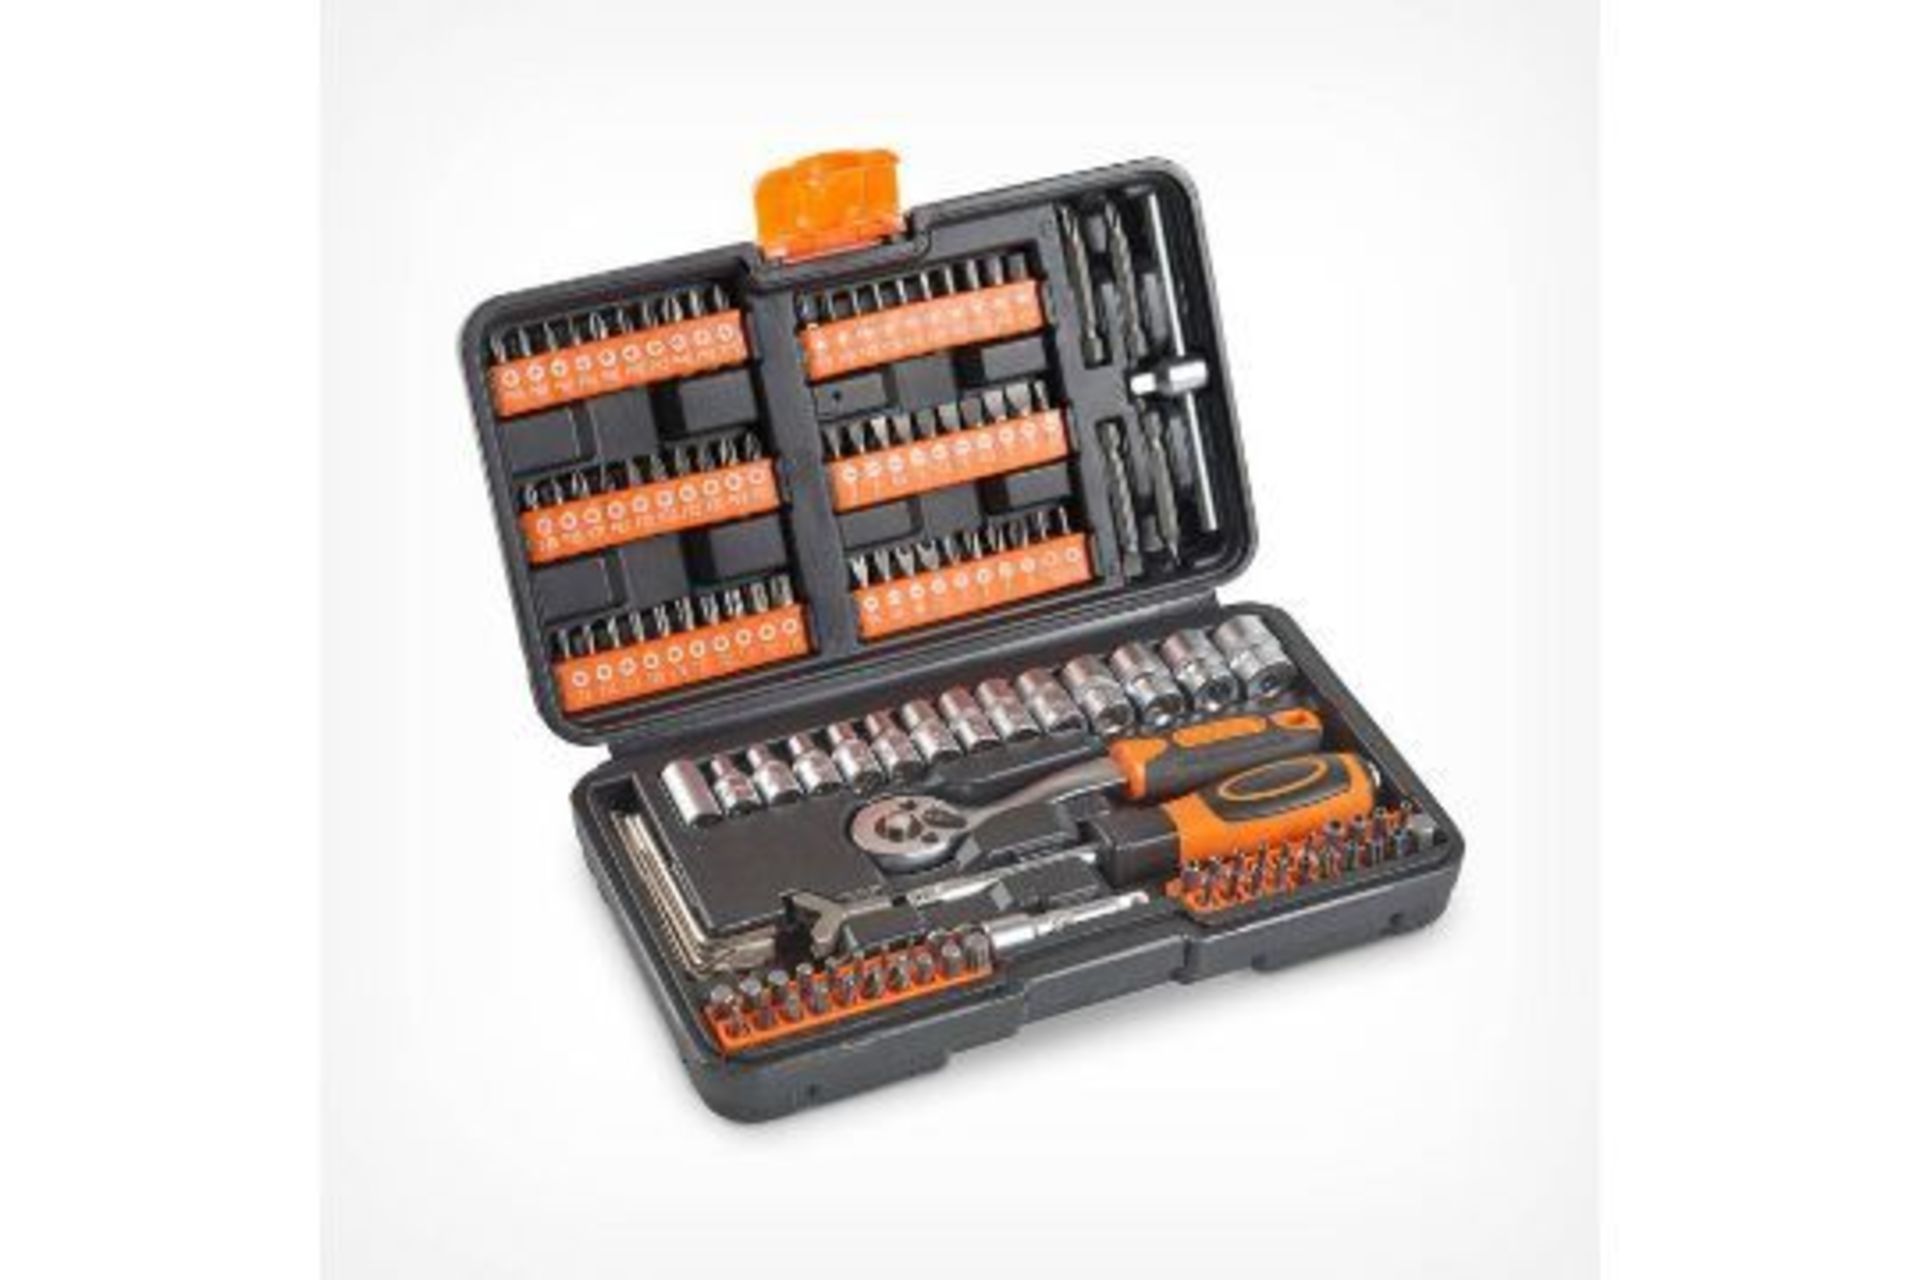 TRADE LOT 10 x New Boxed 130pc Socket + Bit Sets. (REF176-OFC) Be prepared for the unexpected with